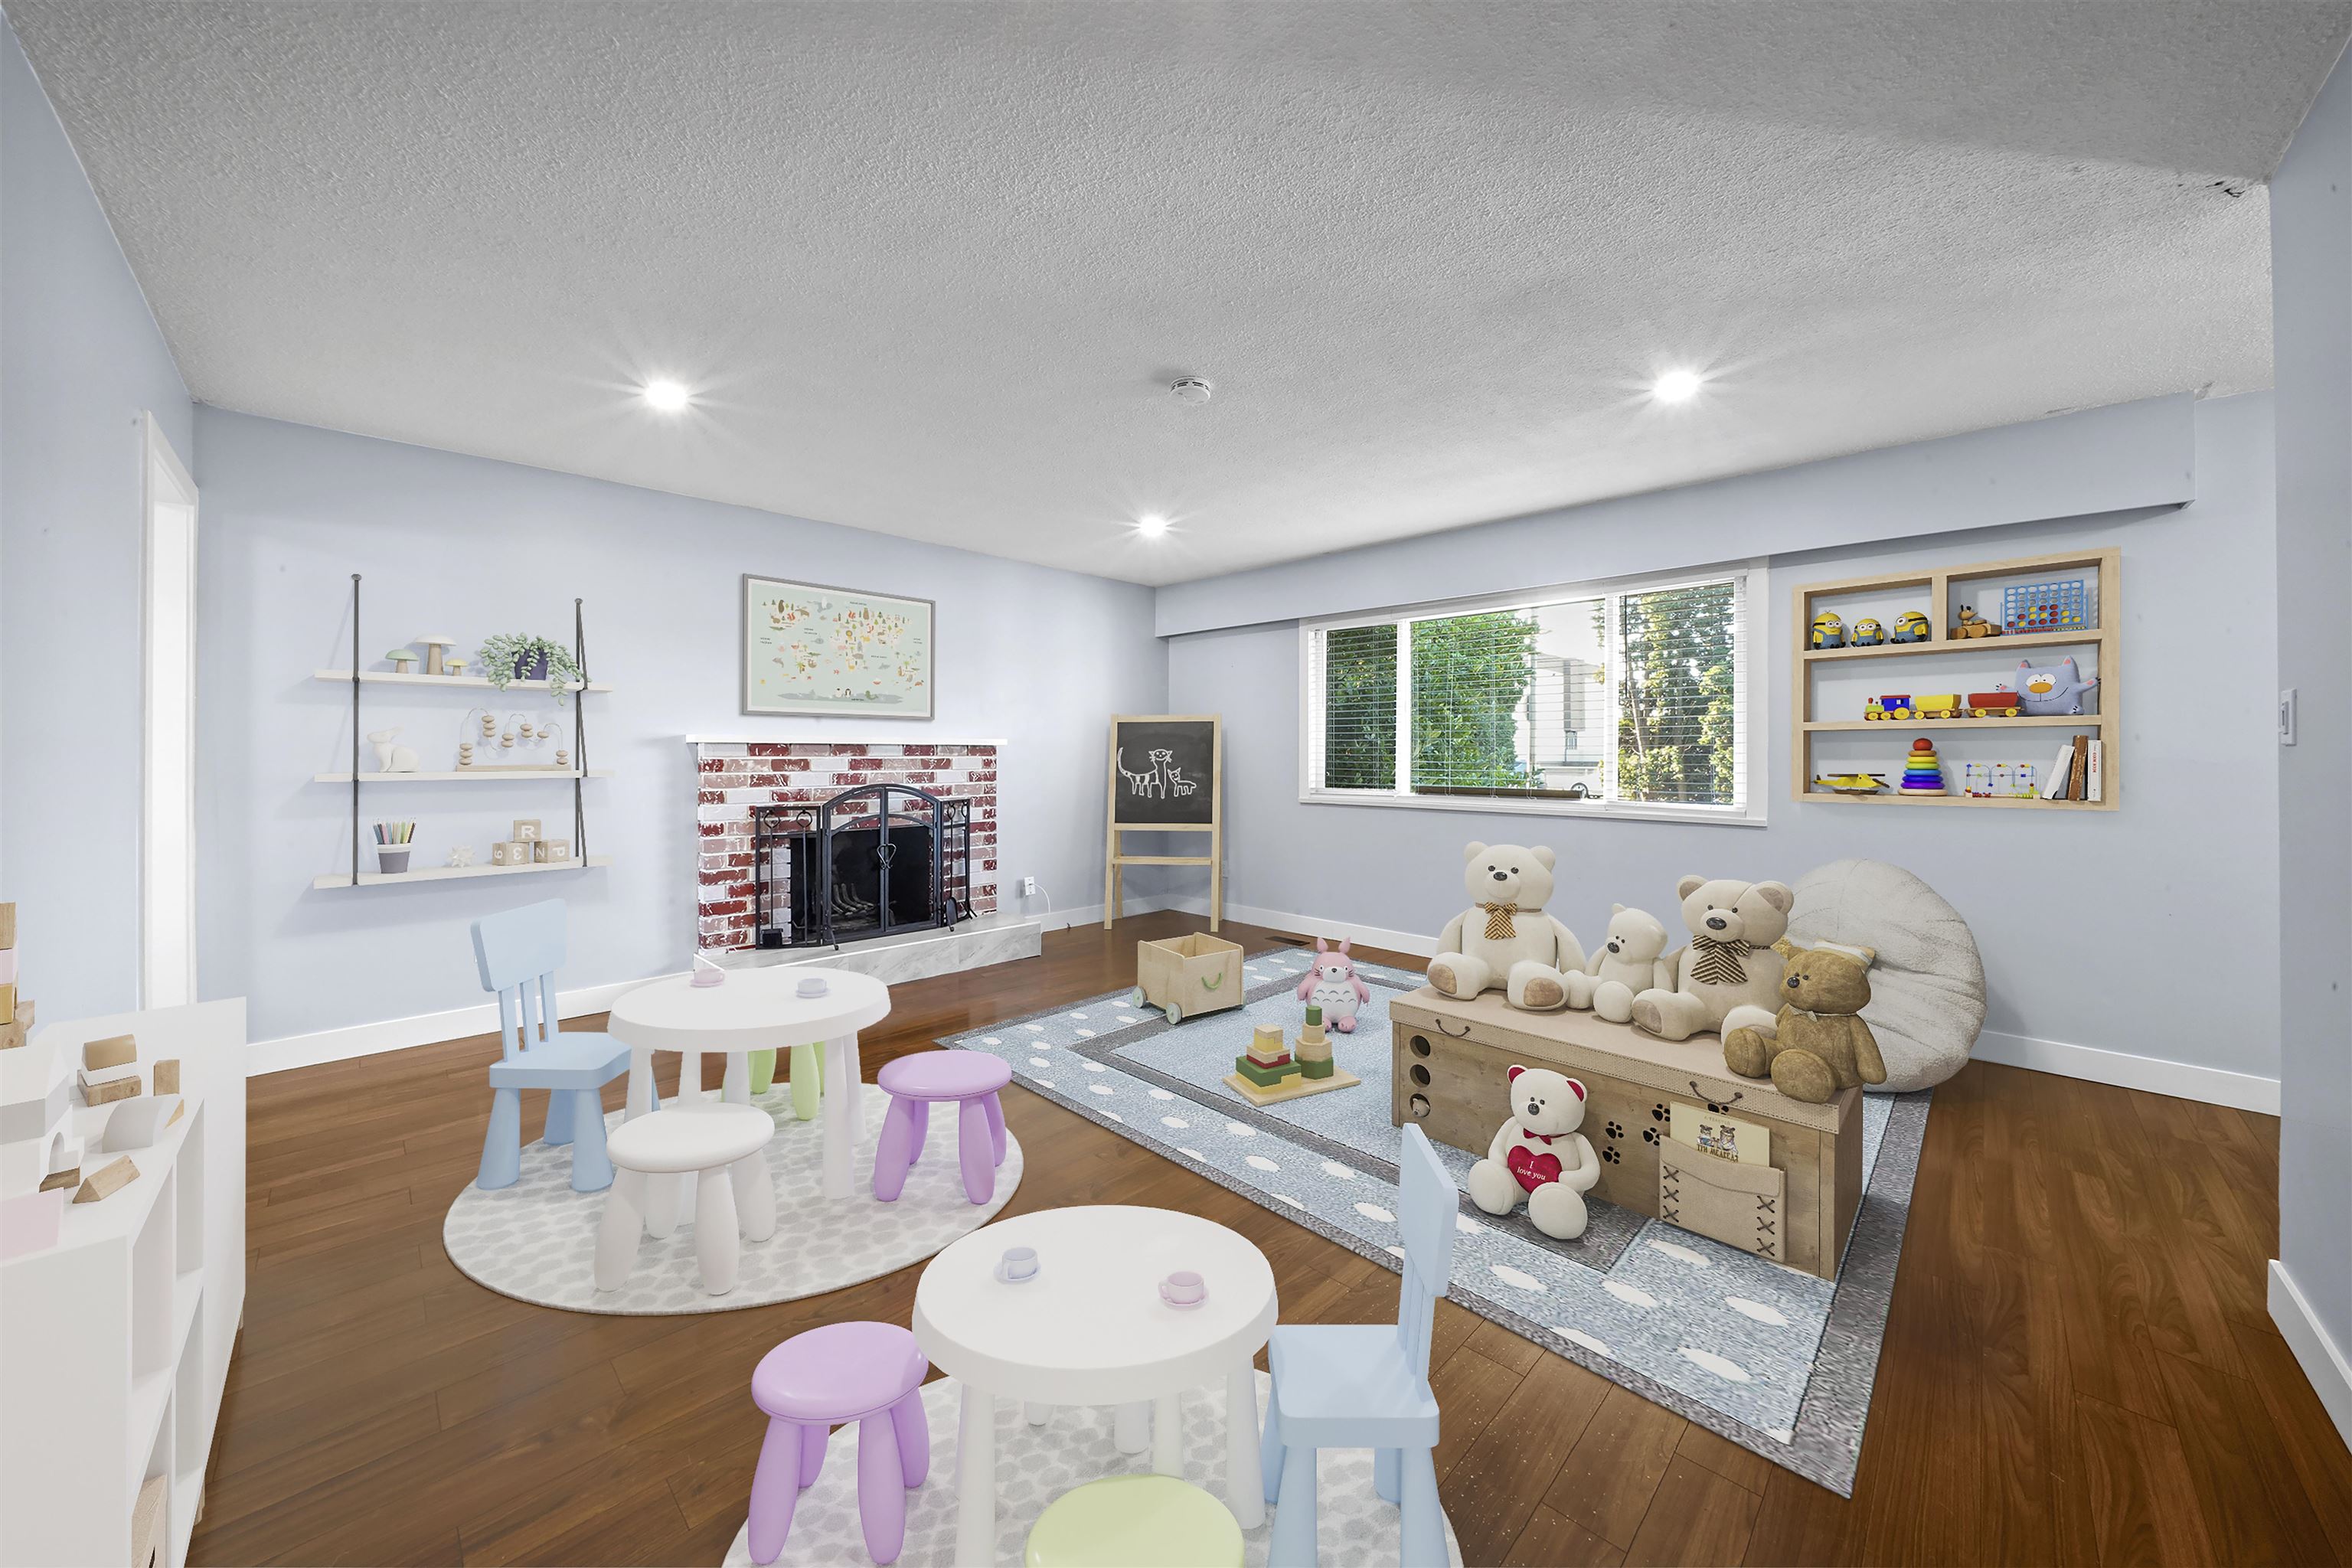 Virtual Daycare zoning use 8 child with possible 16 child with safety refit with architect.